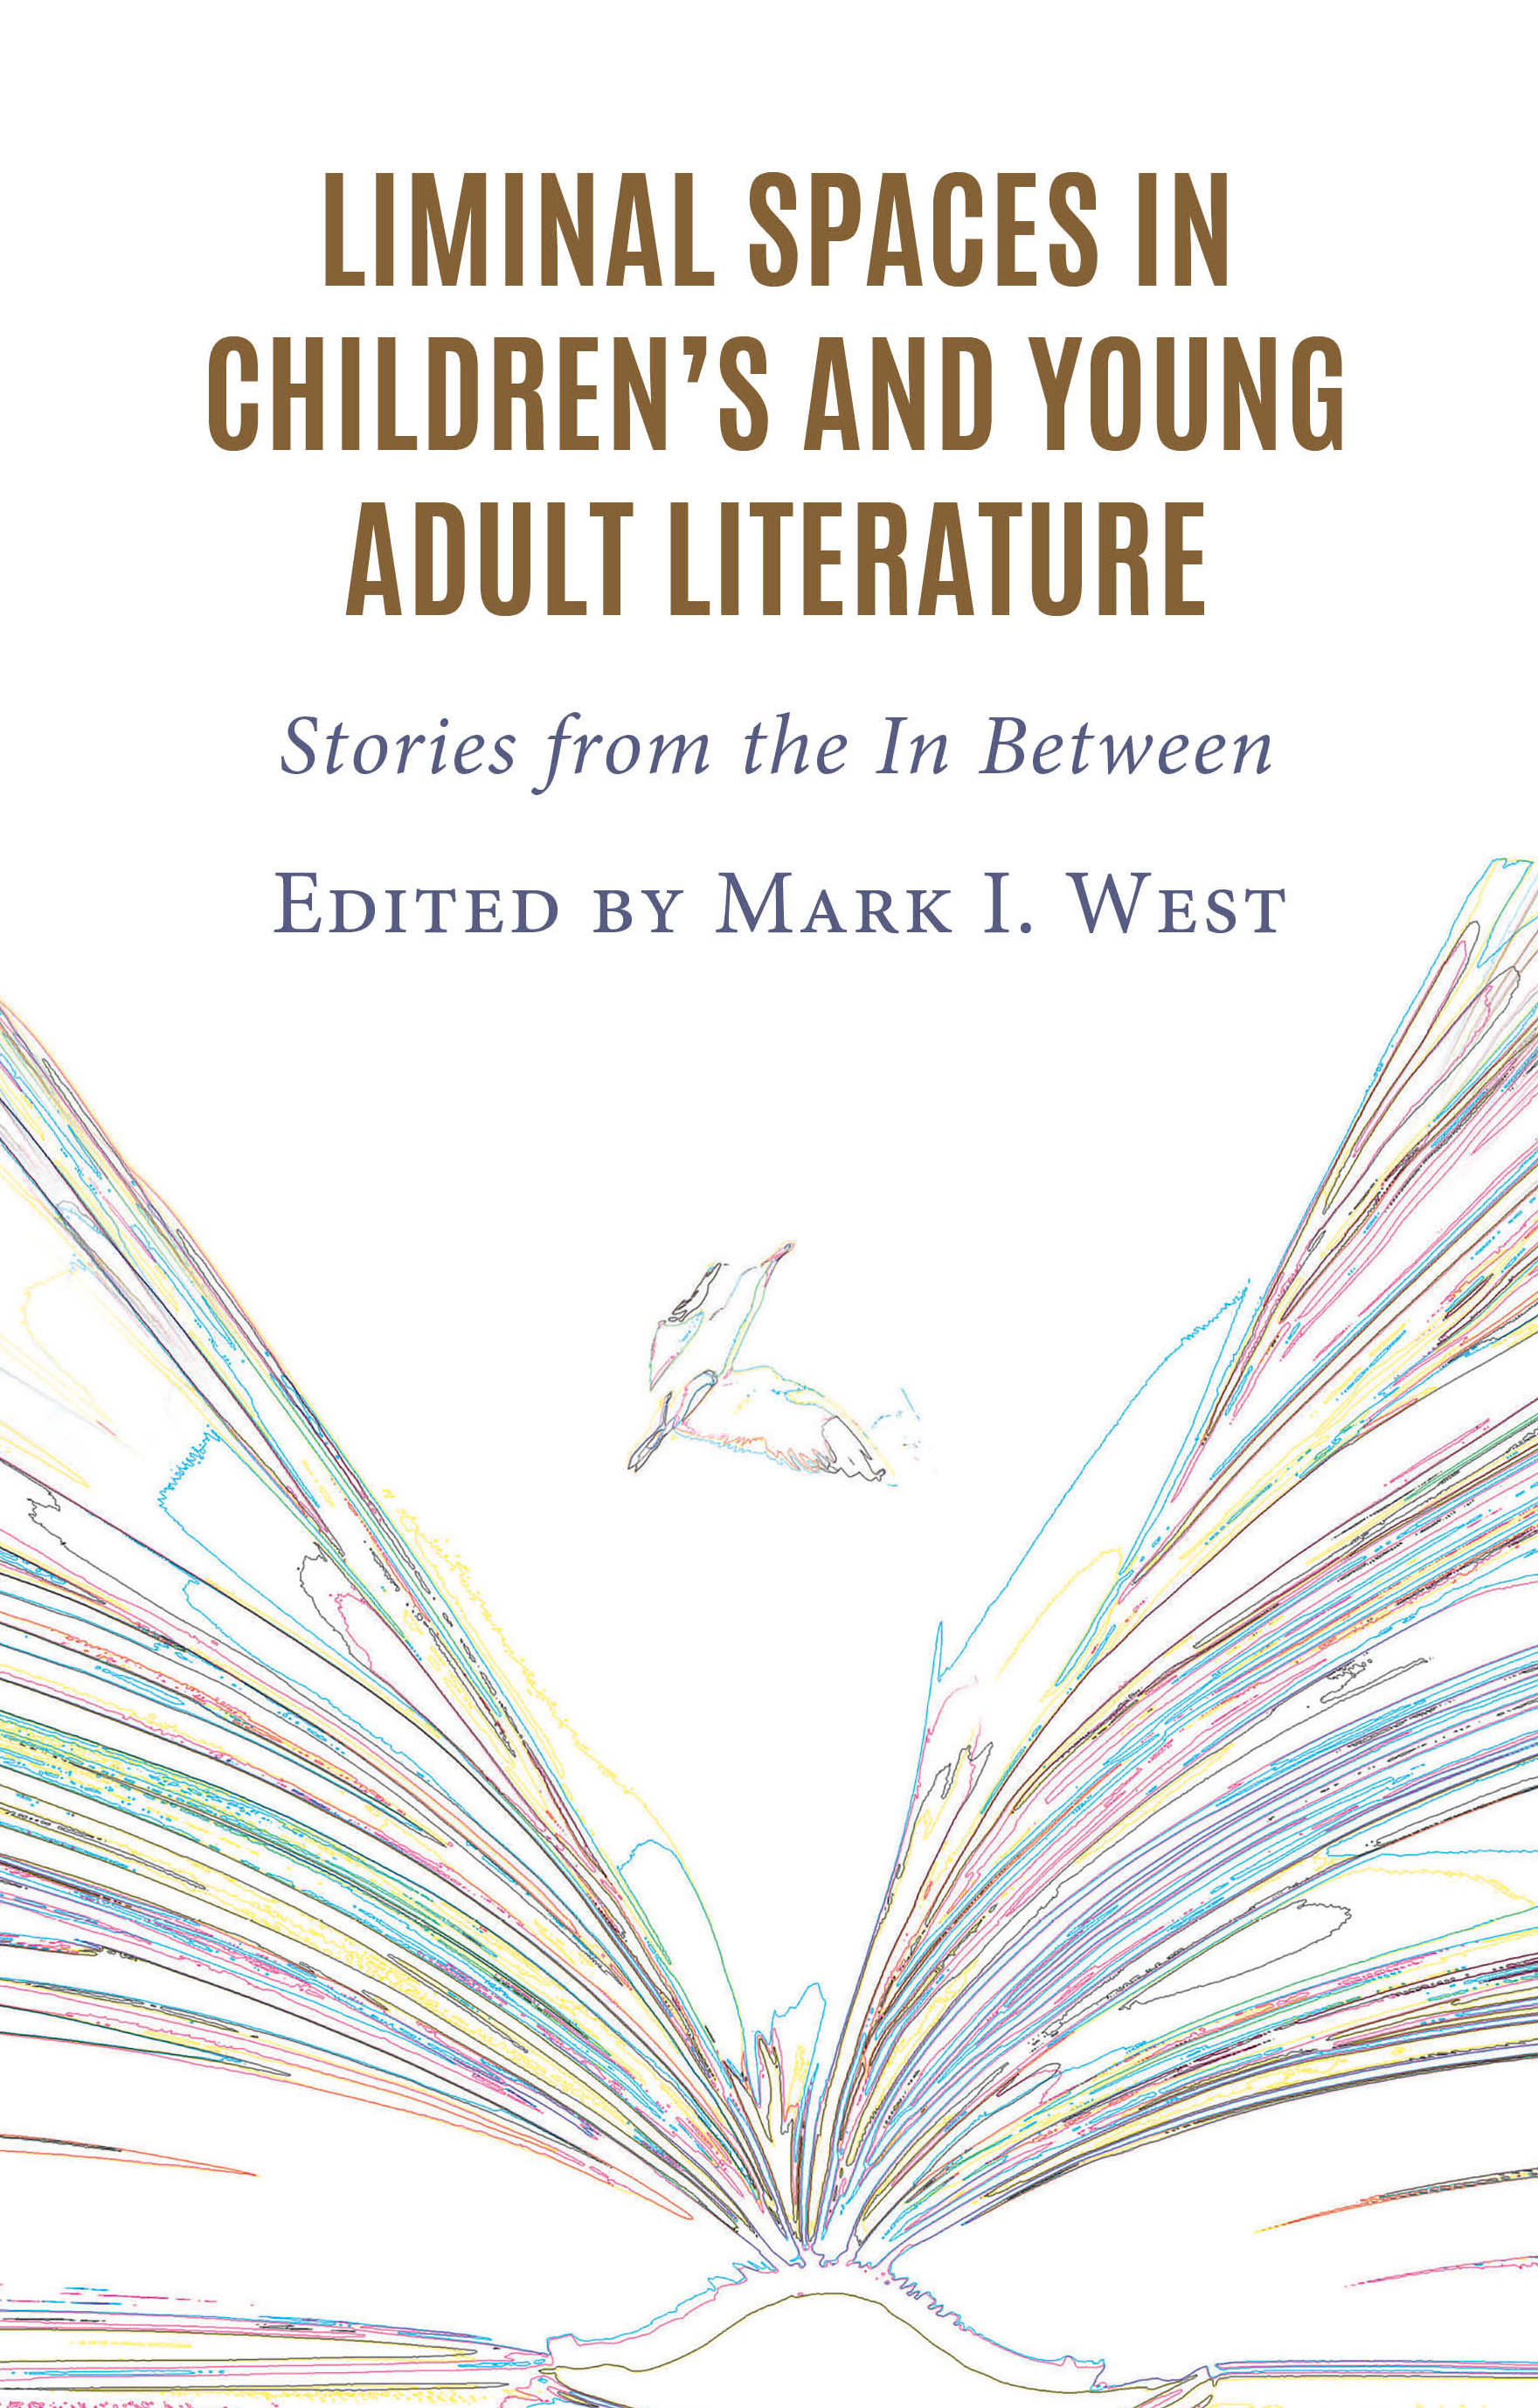 Liminal Spaces in Children’s and Young Adult Literature: Stories from the In Between